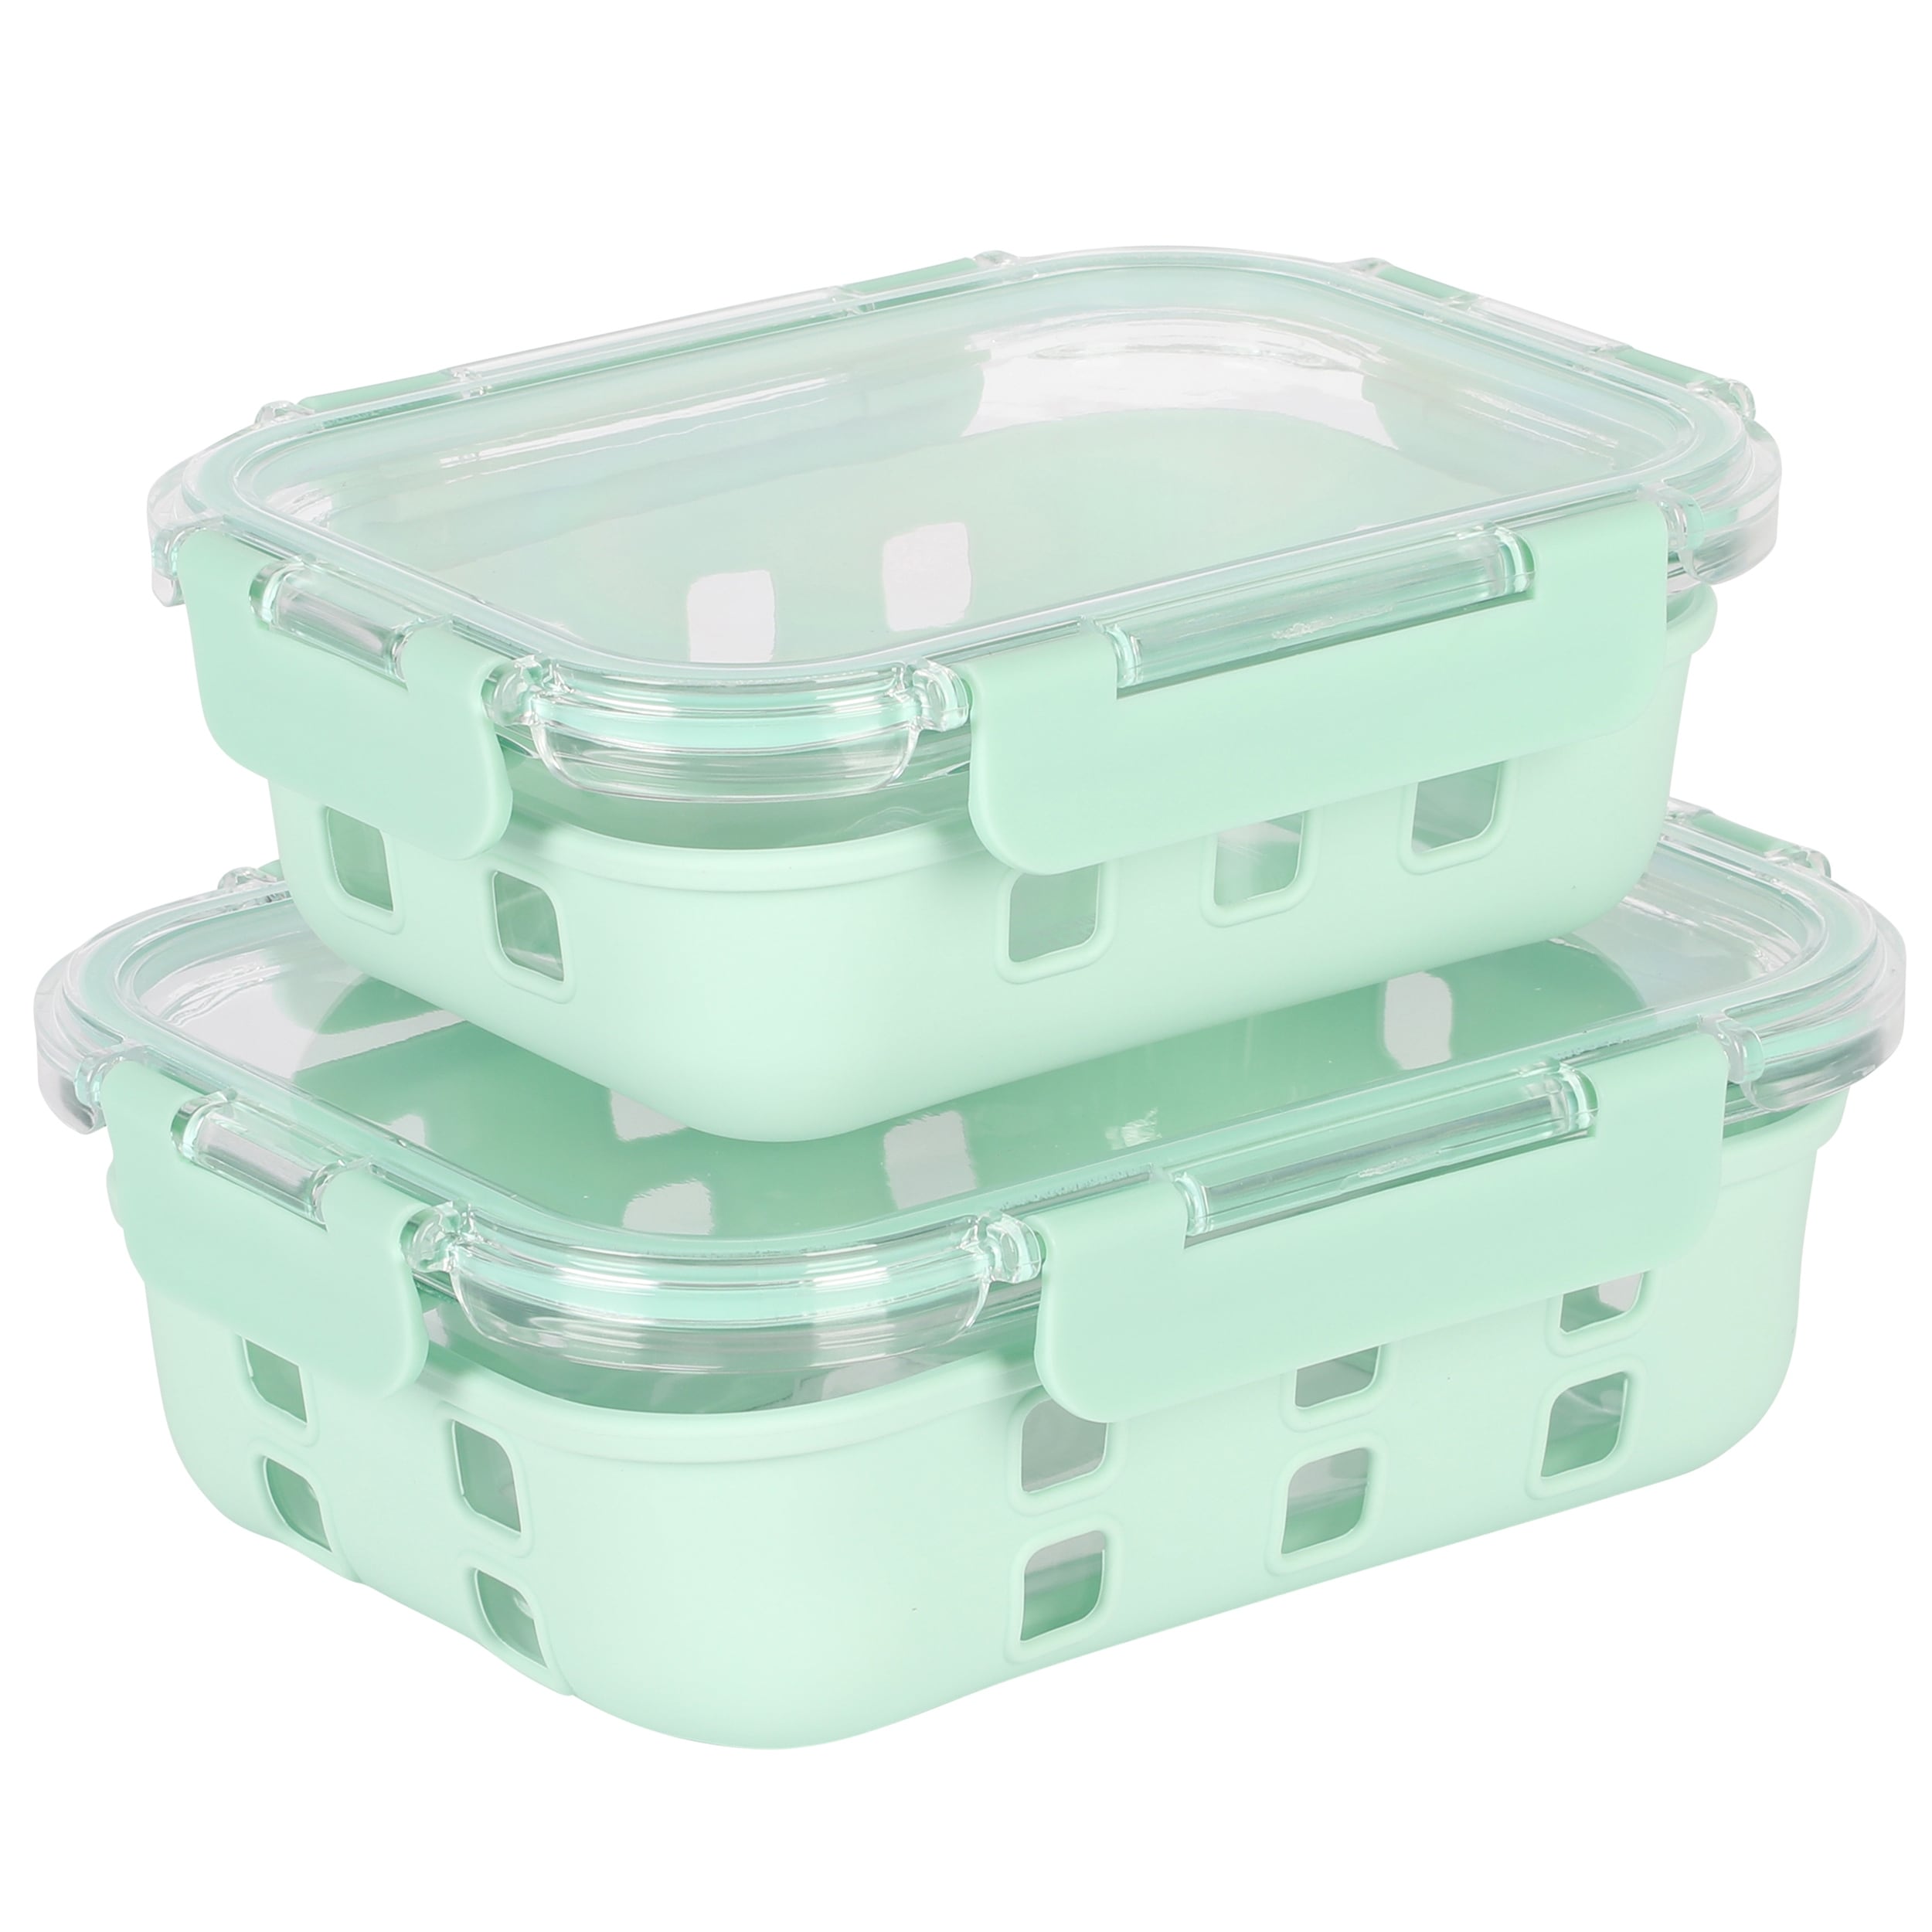 https://ak1.ostkcdn.com/images/products/is/images/direct/34b425c5eb326d5ee3f452453be00e25532fe523/2-Piece-Glass-Container-Set-with-Snap-Lids.jpg